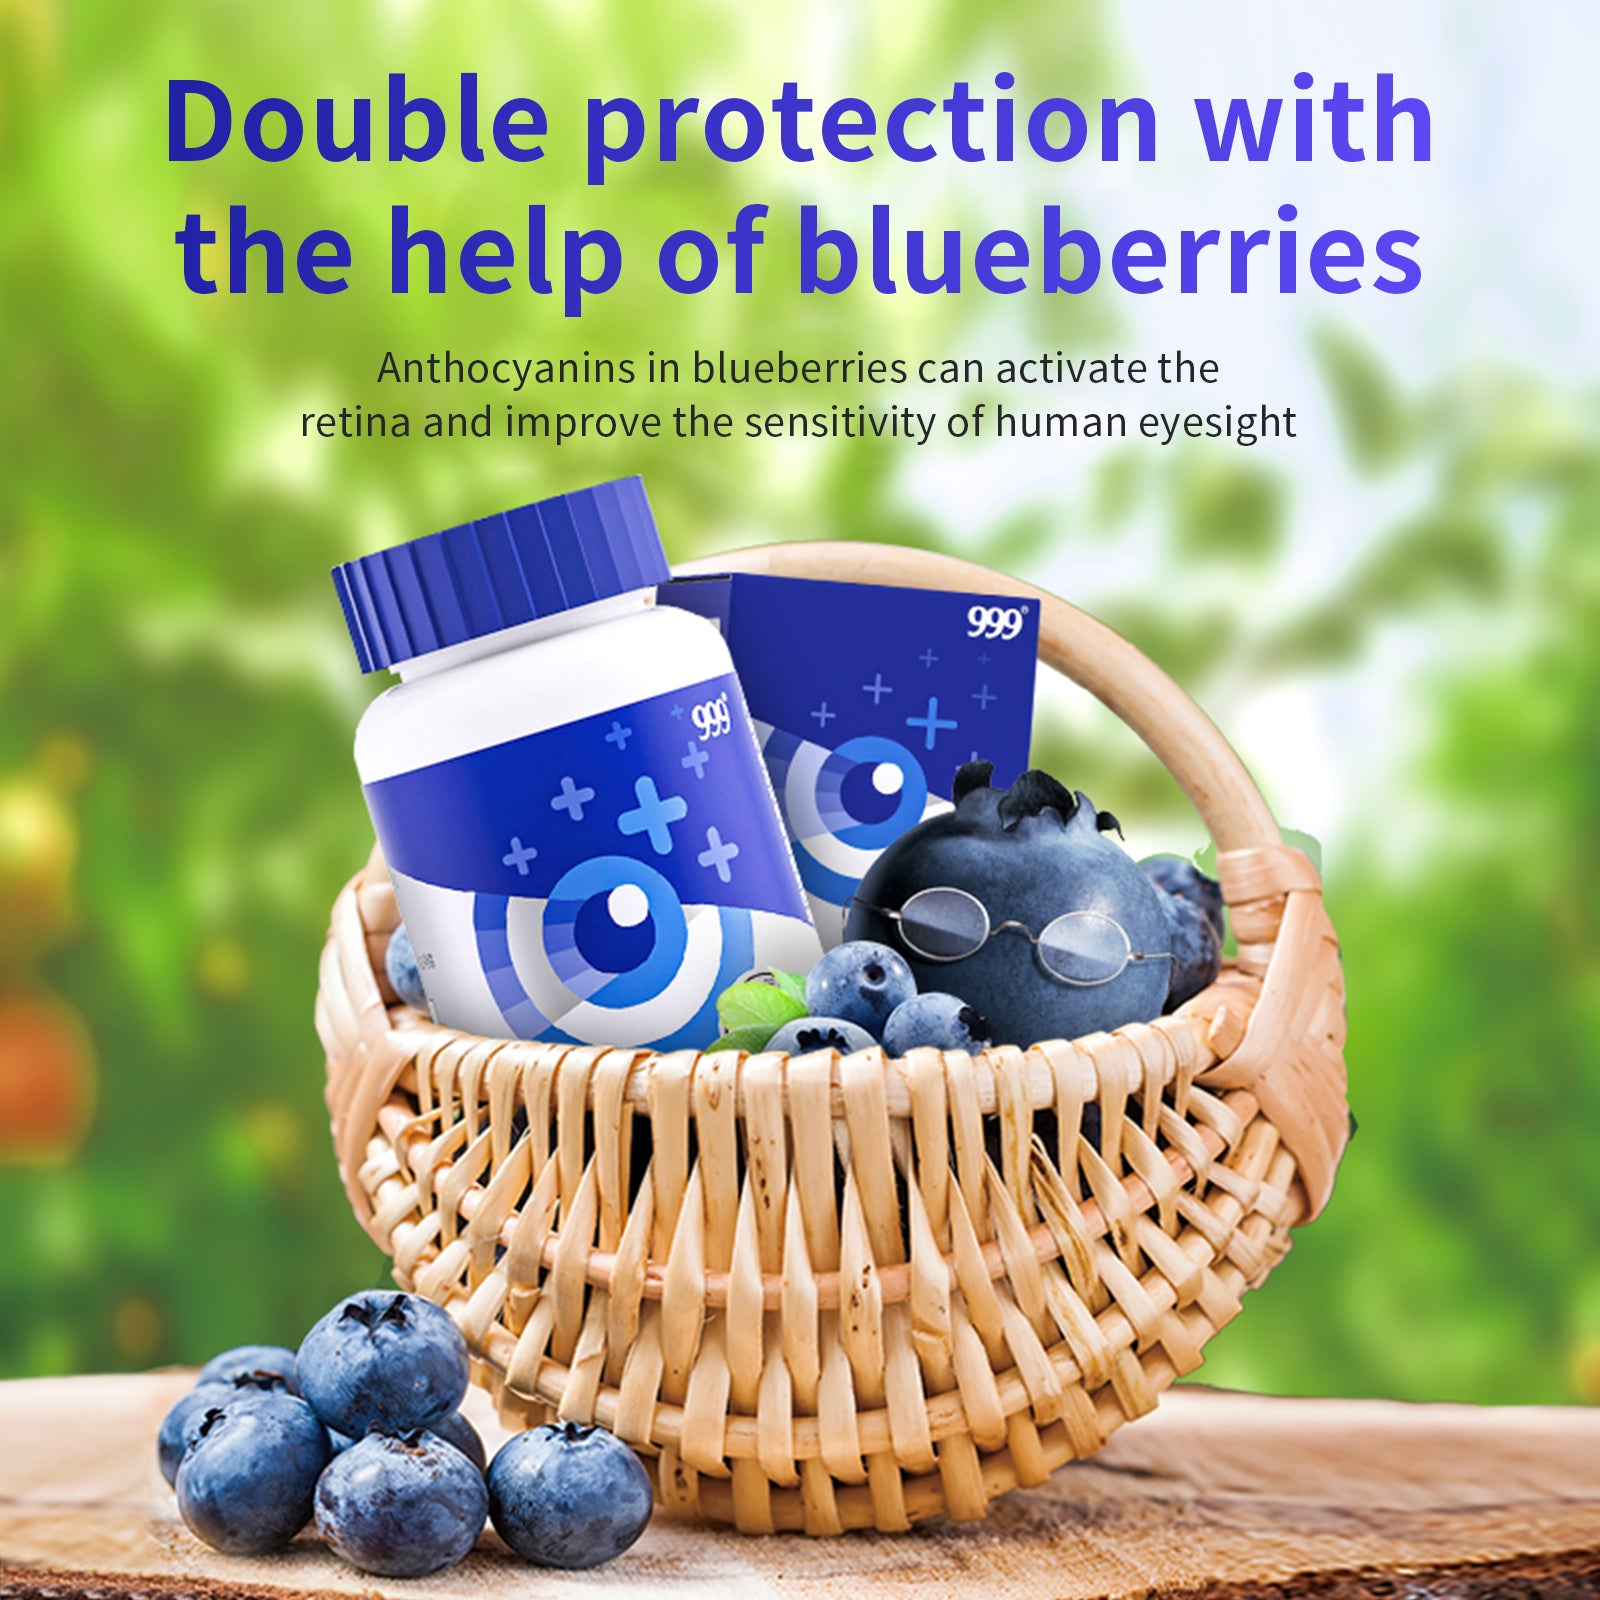 999 Young-BASIC Blueberry Lutein Esters Chewable Tablets- Natural Nutrition Supplement, Antioxidant, Eye Health, 60 Tablets,protection adult children eye,Dry eyes,fatigue,children's myopia protection,relieve eye strain,health supplements - 999 Medical